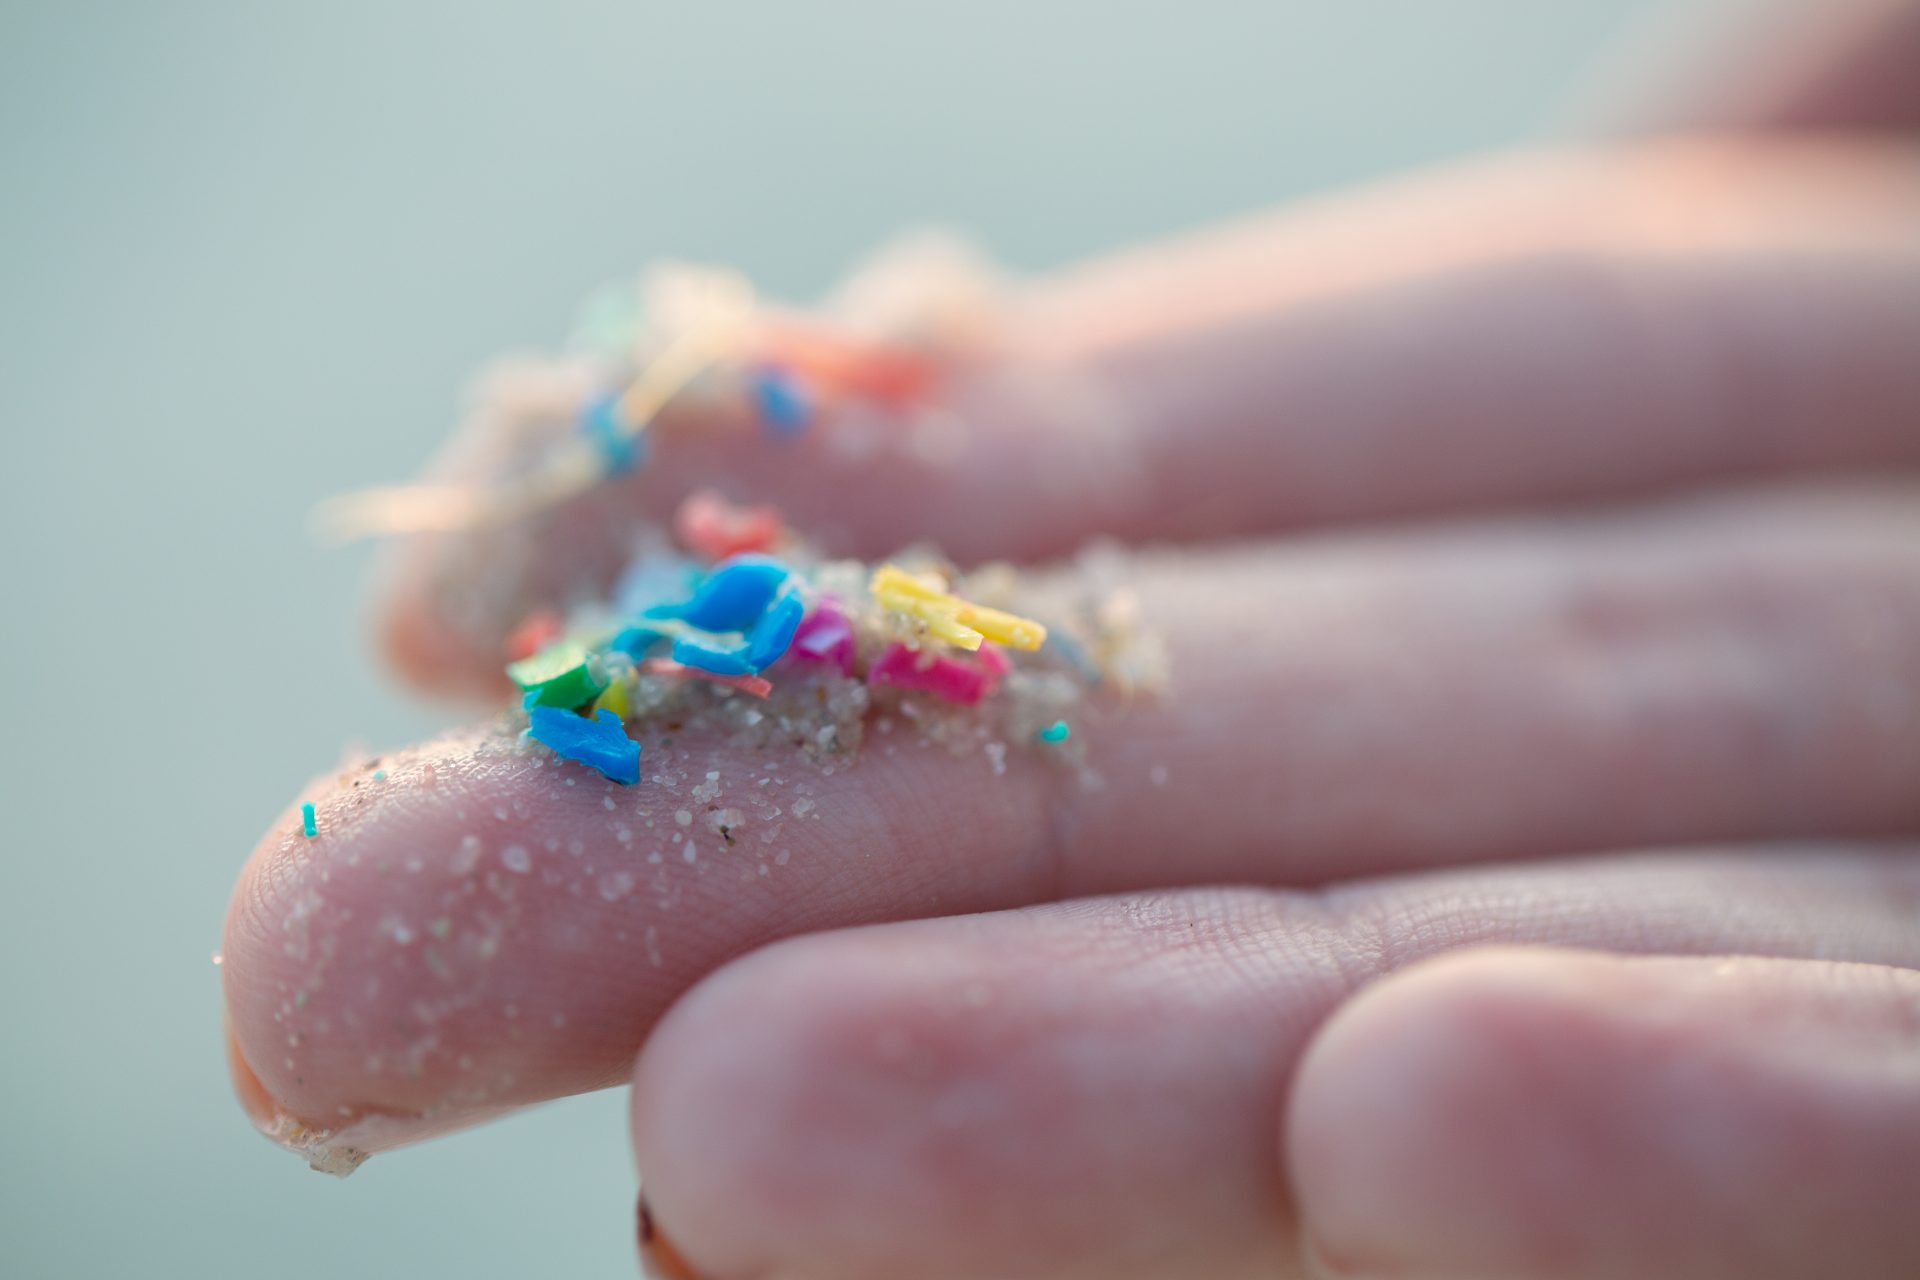 <p>A recent study detected the presence of microplastics inside people's arteries and showed that this can be a serious health issue since they can increase the risk of heart attacks and strokes.</p>